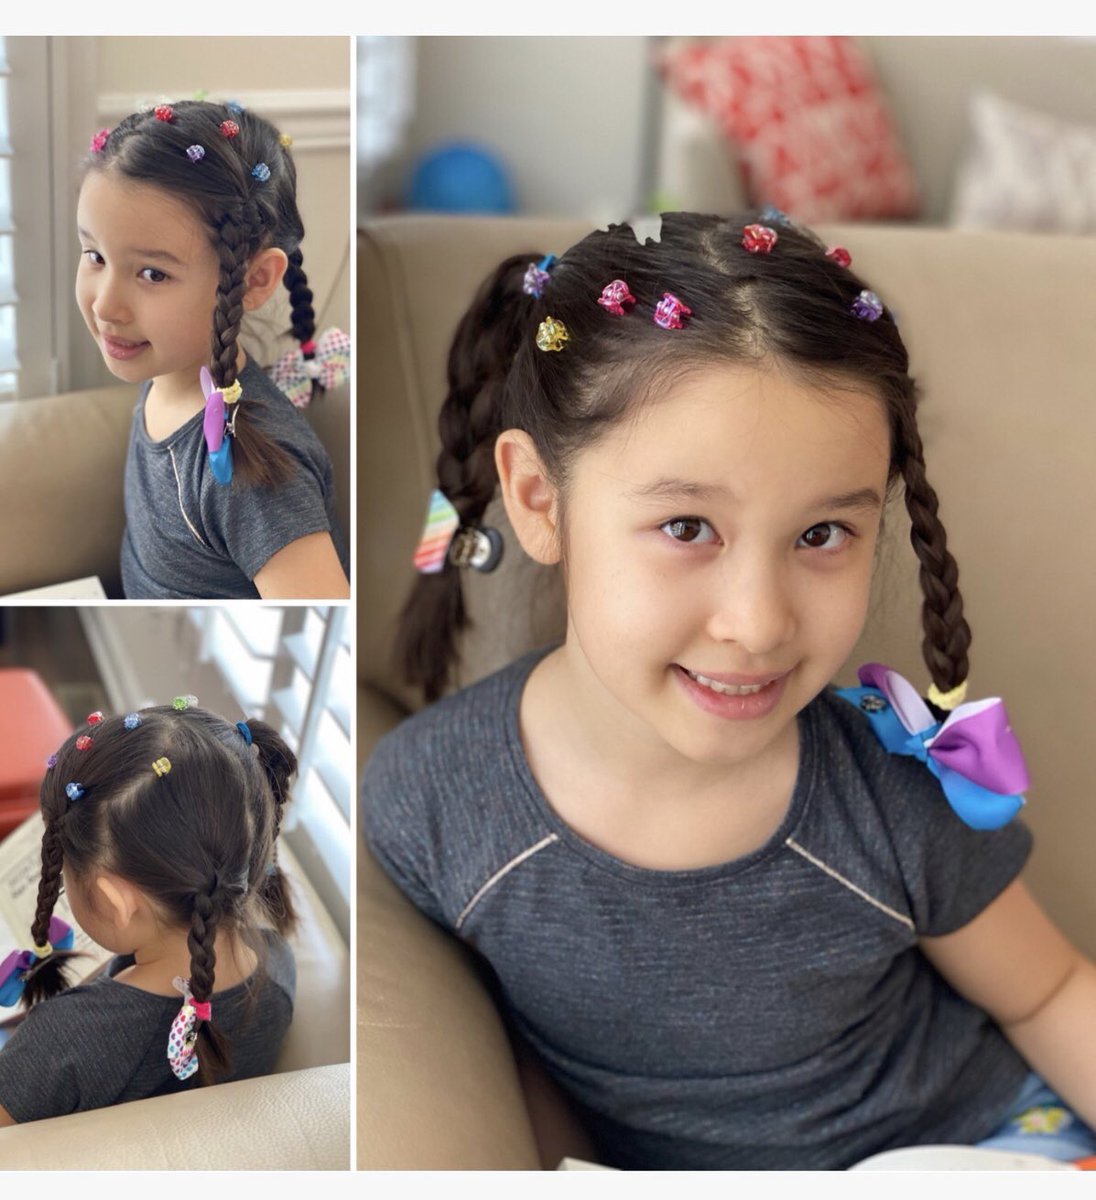 Crazy hair day! <a target='_blank' href='http://search.twitter.com/search?q=KWBPride'><a target='_blank' href='https://twitter.com/hashtag/KWBPride?src=hash'>#KWBPride</a></a> <a target='_blank' href='http://search.twitter.com/search?q=schoolspirit'><a target='_blank' href='https://twitter.com/hashtag/schoolspirit?src=hash'>#schoolspirit</a></a> <a target='_blank' href='https://t.co/EKLhGTcdmS'>https://t.co/EKLhGTcdmS</a>